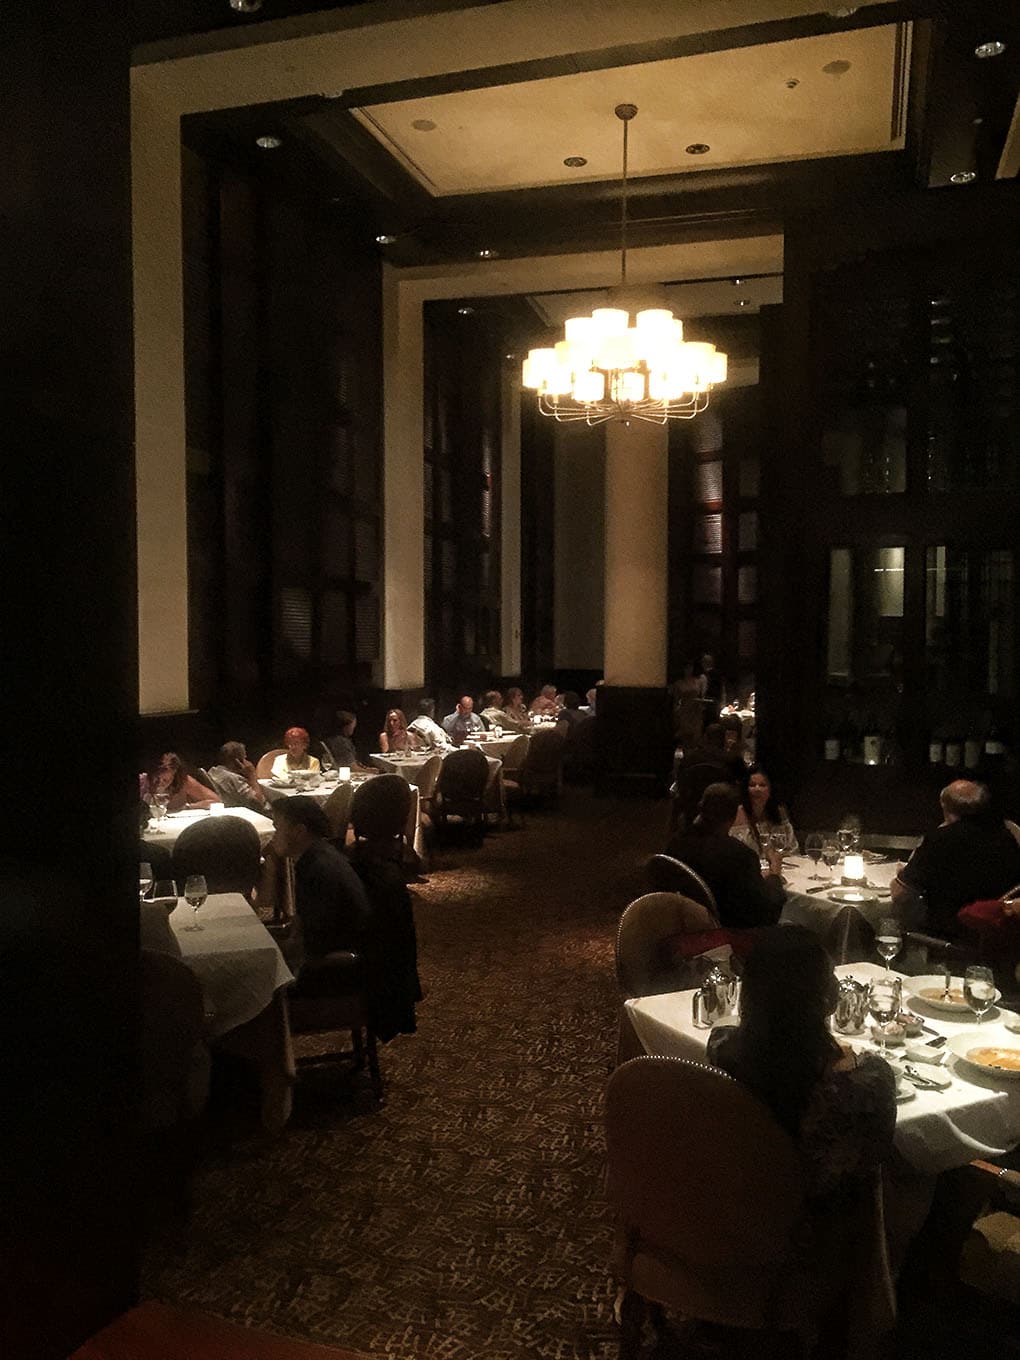 The main dining room at the Diplomat Prime